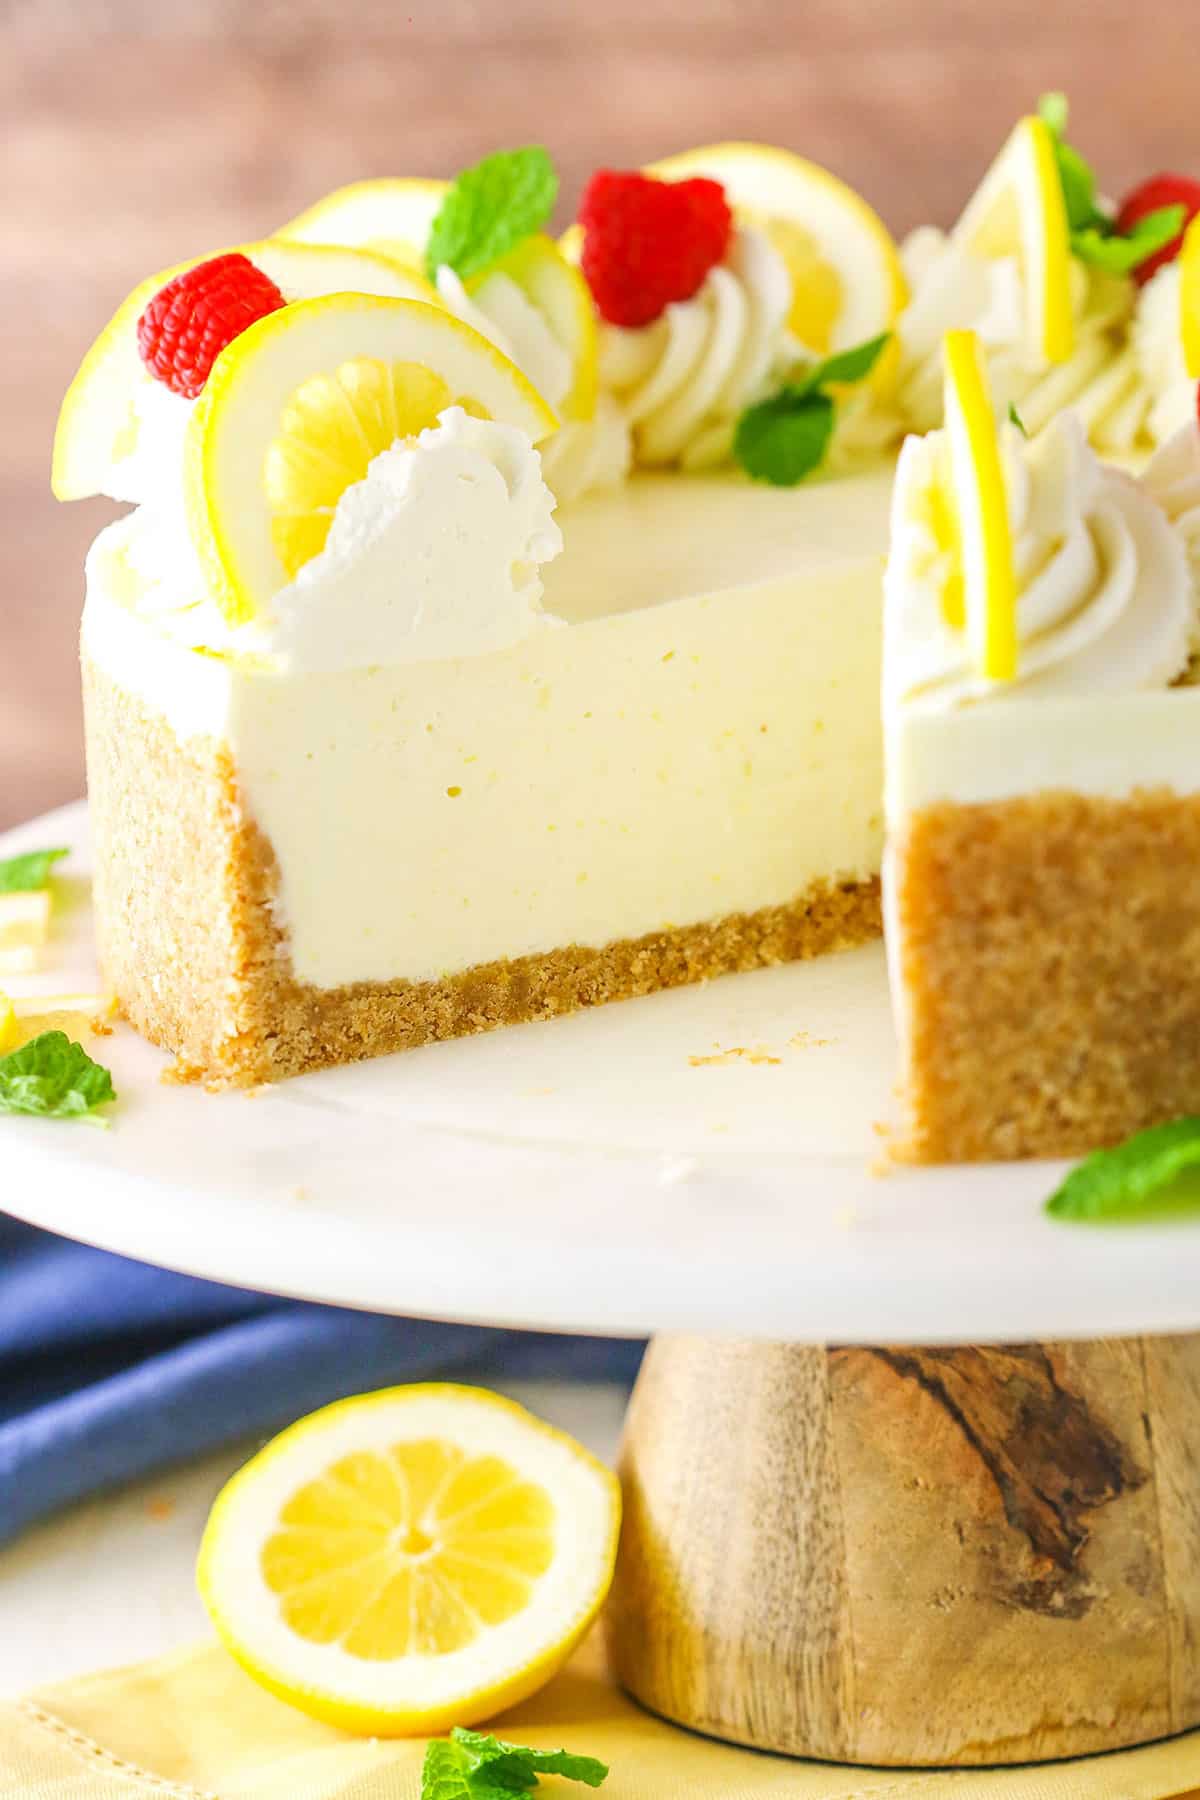 Side view of a No Bake Lemon Cheesecake with a slice removed on a white cake stand with a wooden base